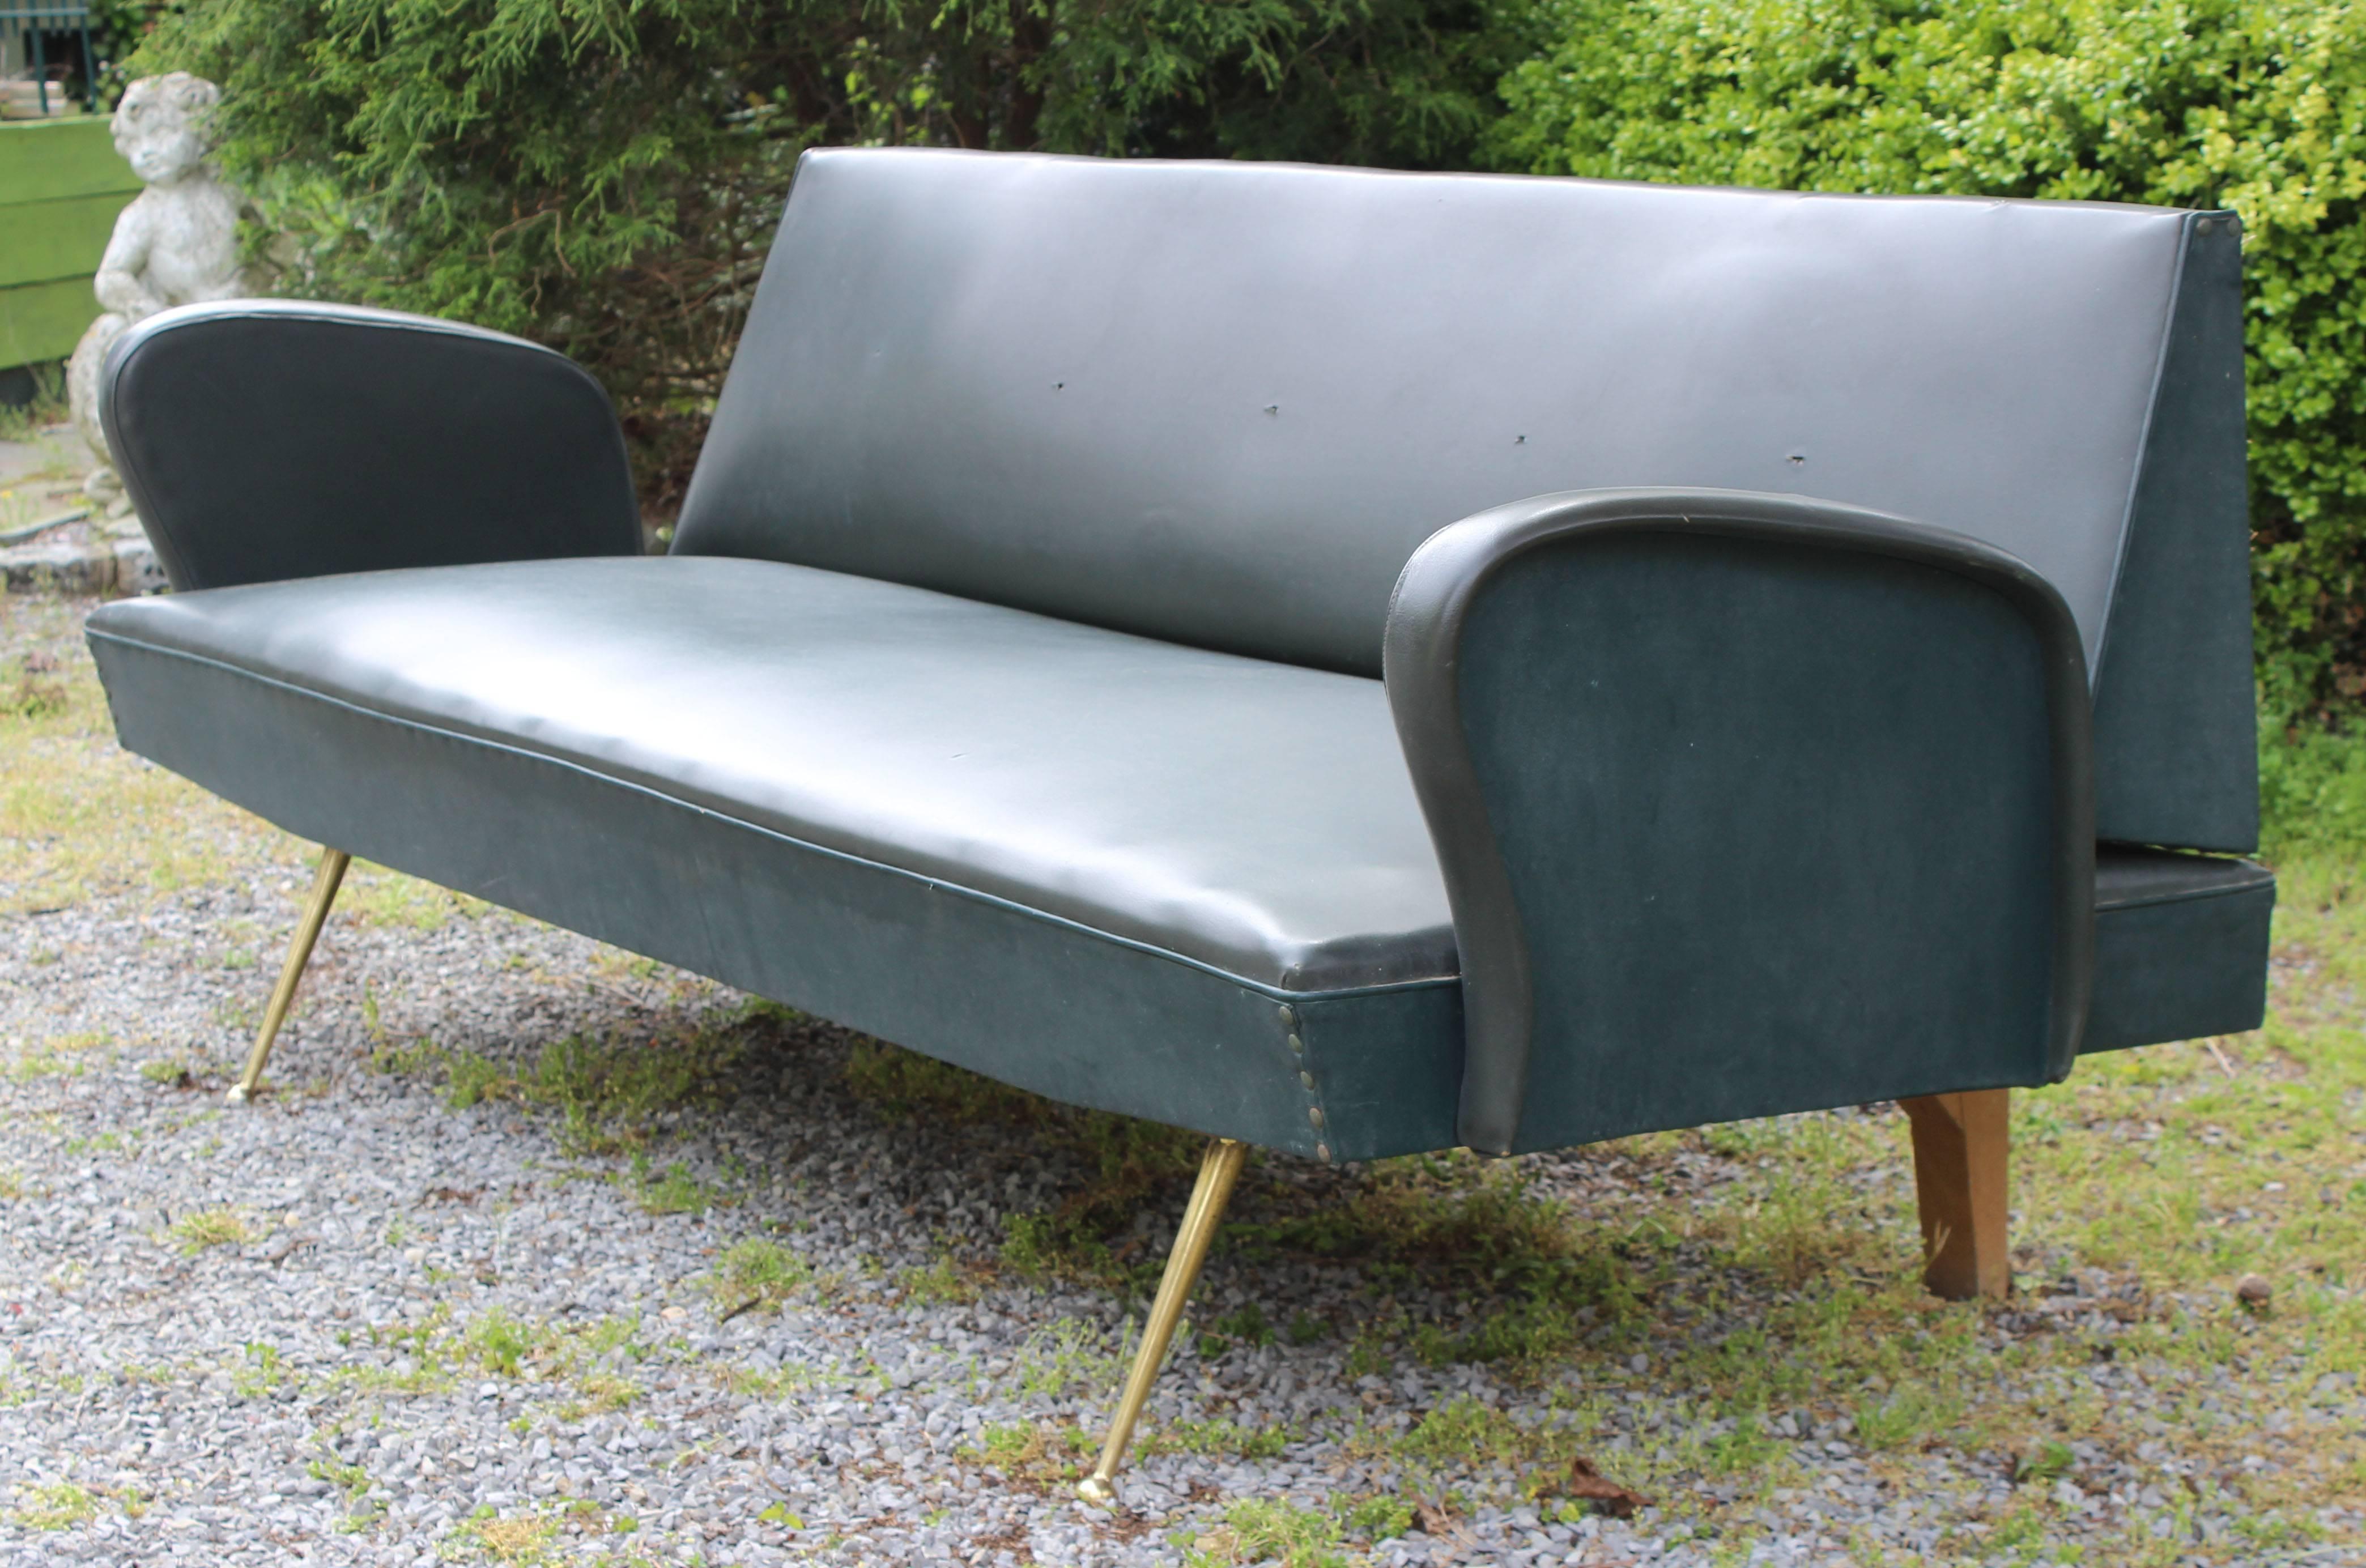 An Italian Mid-Century sofa or daybed in original vinyl upholstery, with brass leg details.